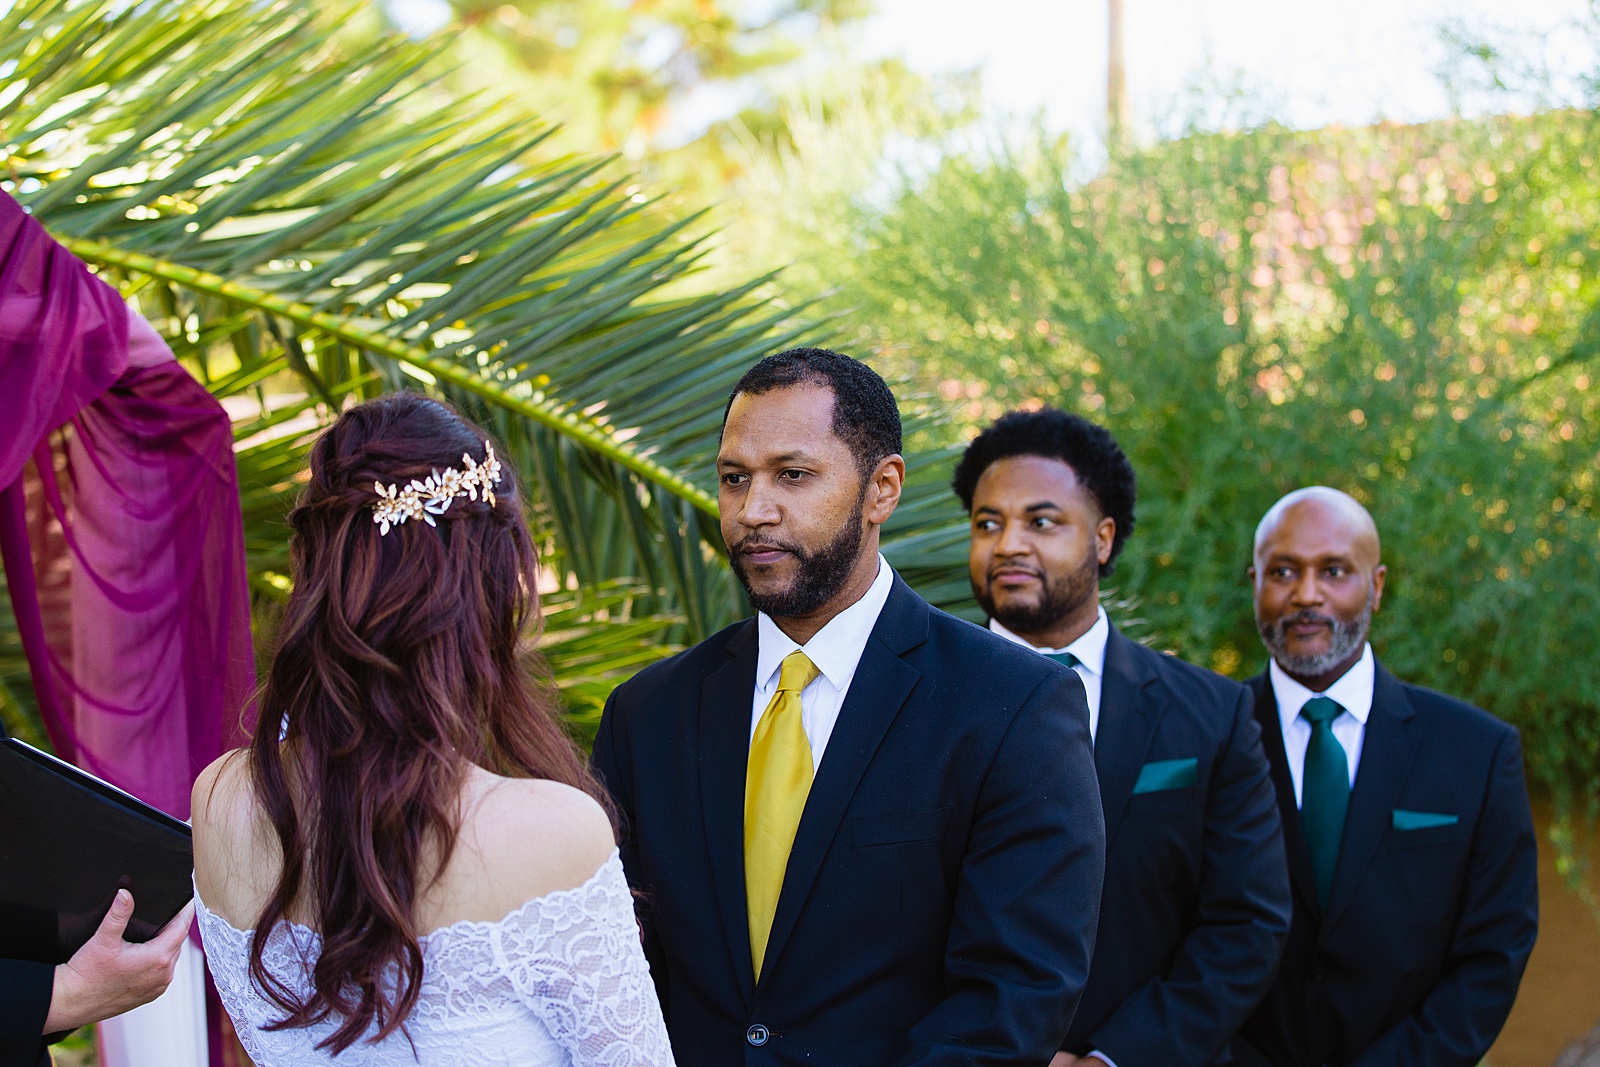 Groom looking at his bride during their wedding ceremony at Backyard Micro by Scottsdale wedding photographer PMA Photography.